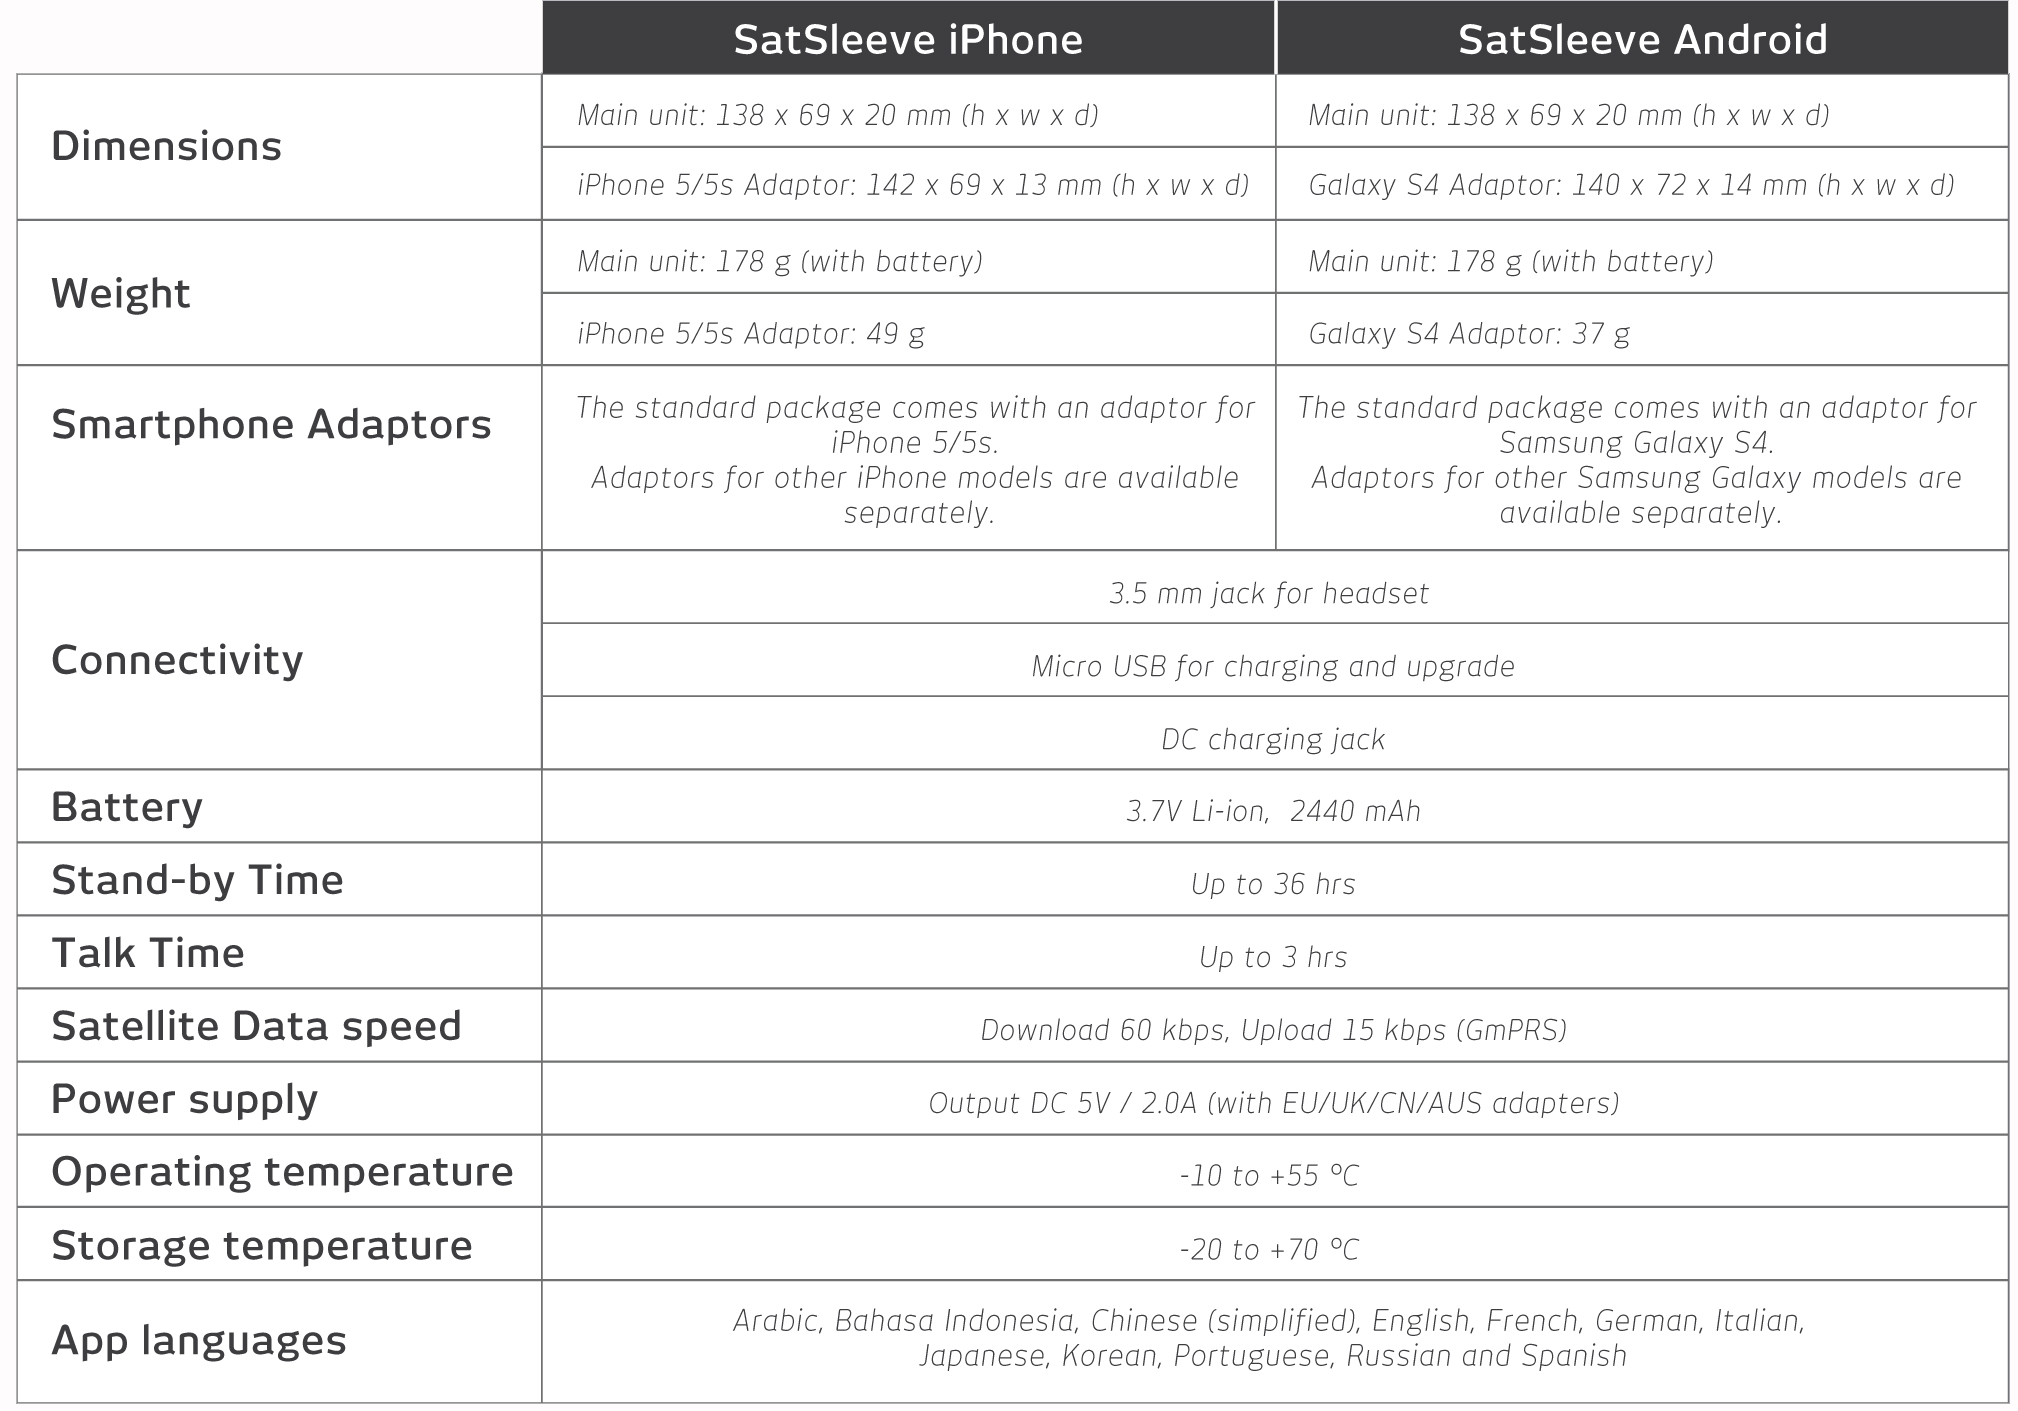 satsleeve-iphone-android-specification-chart.jpg